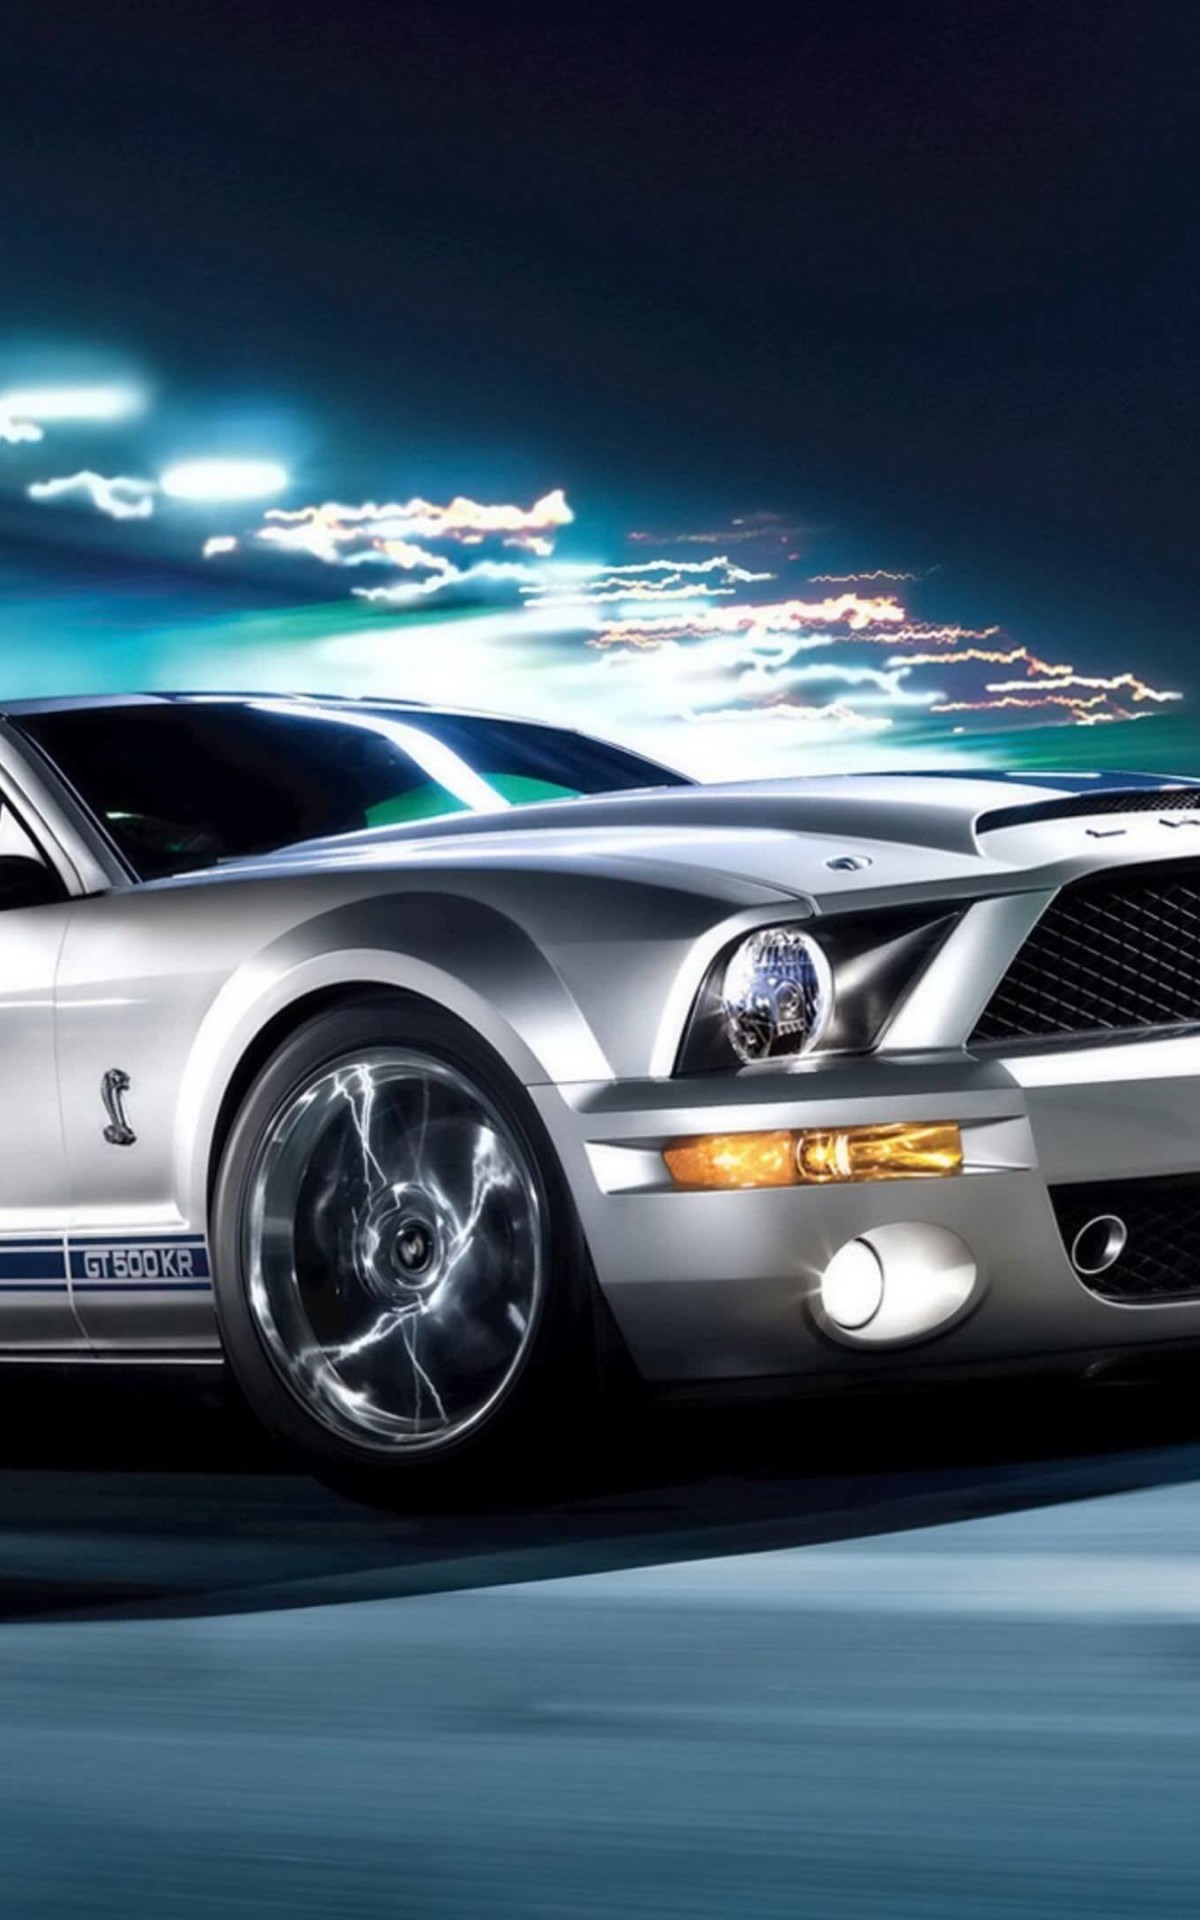 Ford Mustang Shelby GT500KR Wallpaper for Amazon Kindle Fire HDX